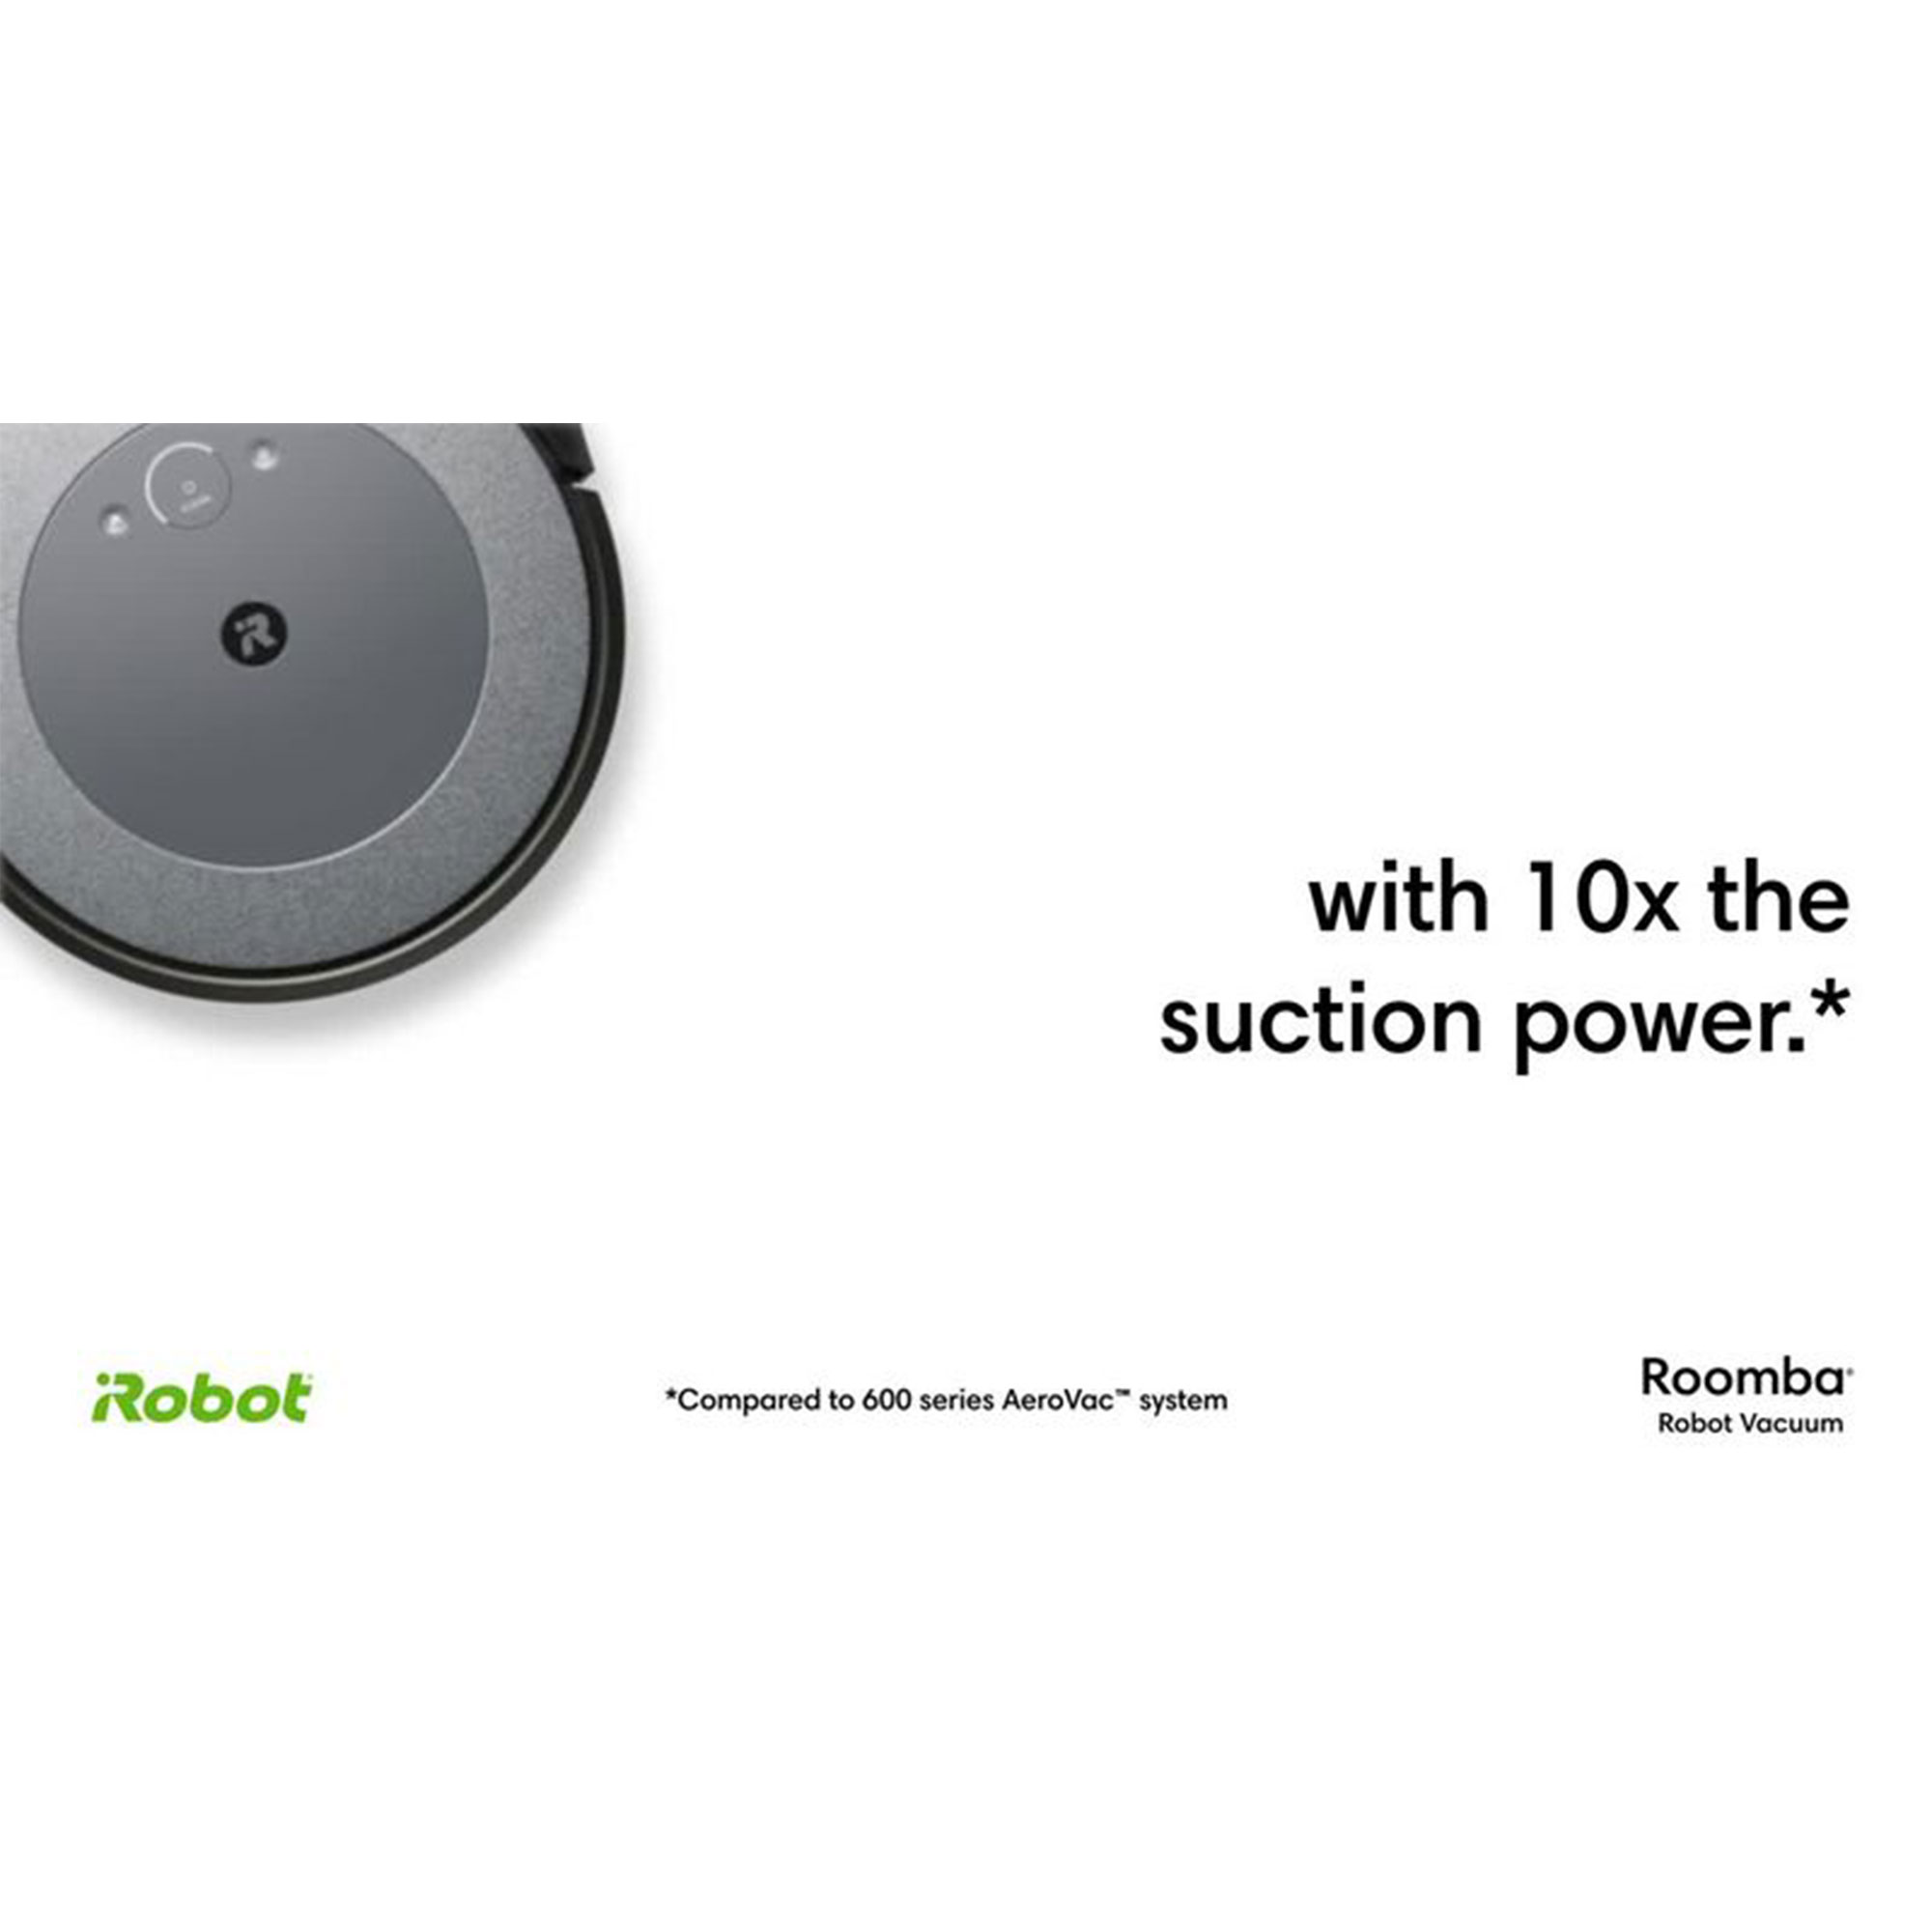 iRobot Introduces the Roomba® i3+, Expanding Its Intelligent, Self-Emptying Product Lineup